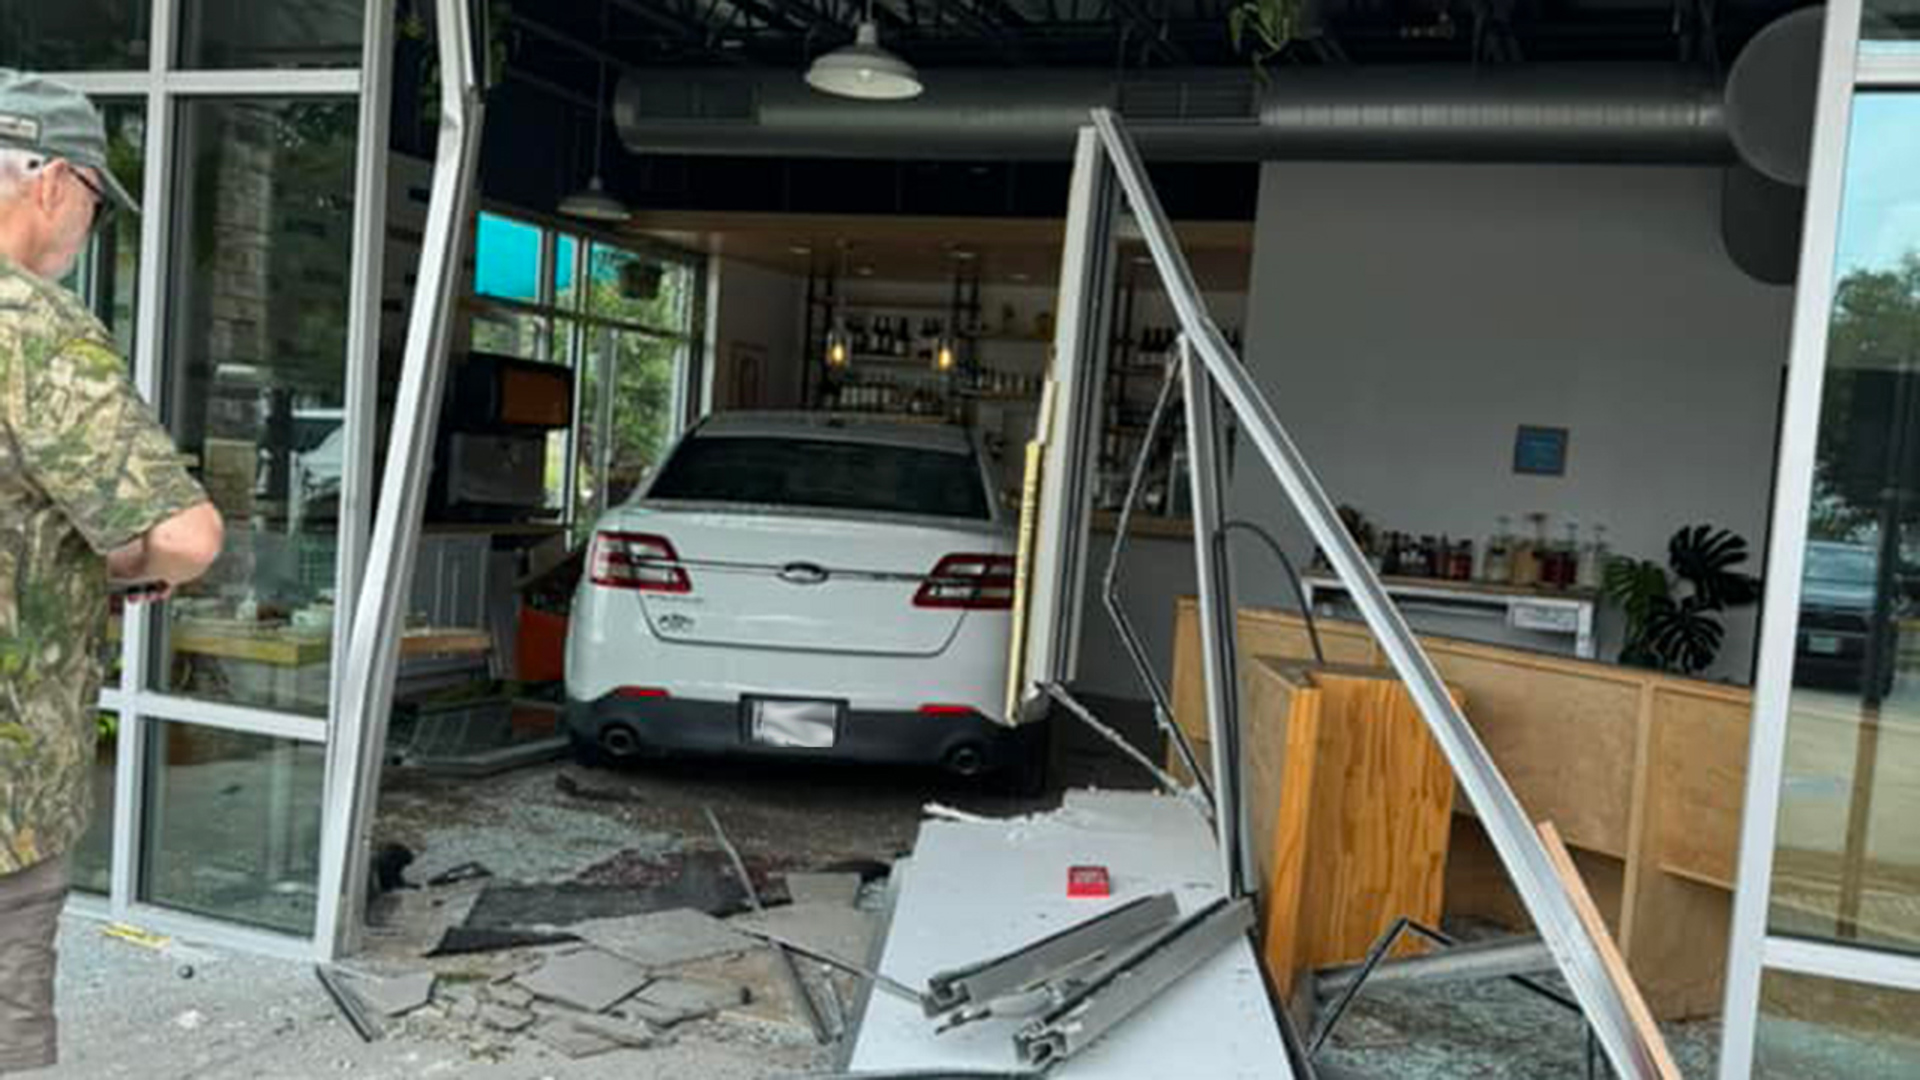 Several people were injured and some were transported to the hospital after a car slammed into a restaurant in Jersey Village Saturday afternoon, per police.